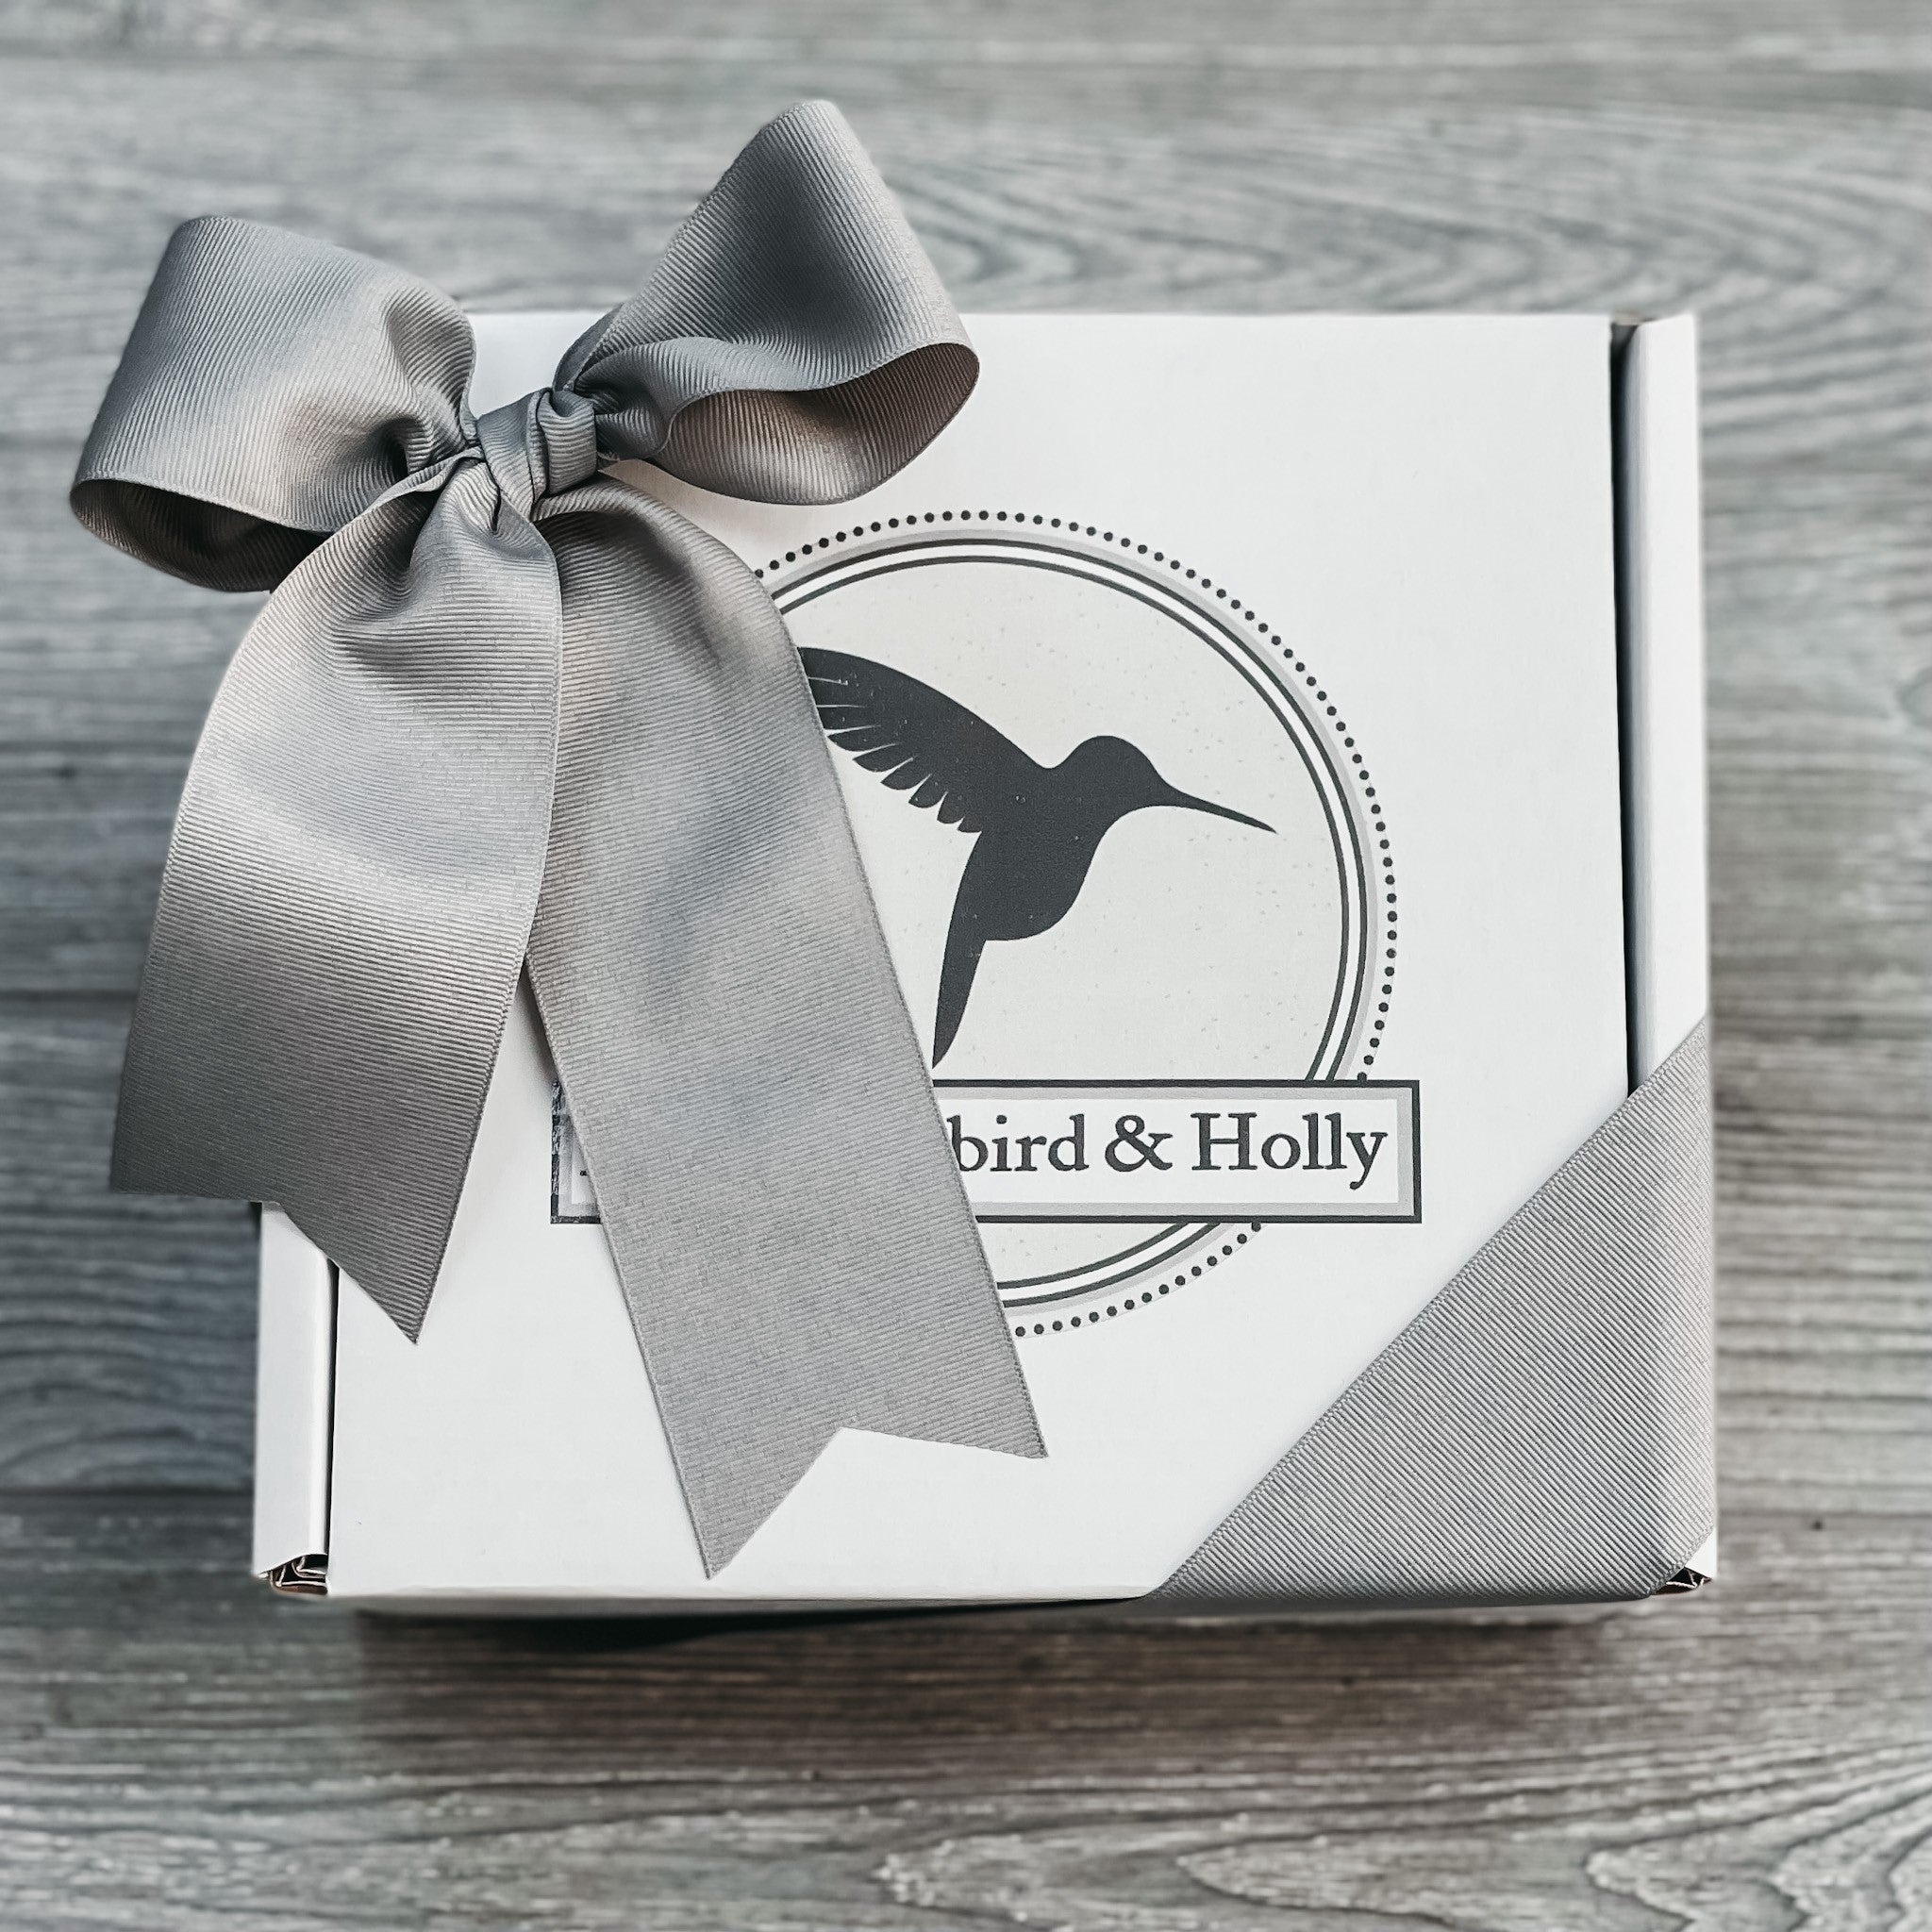 8x8 white gift box with logo and grosgrain ribbon